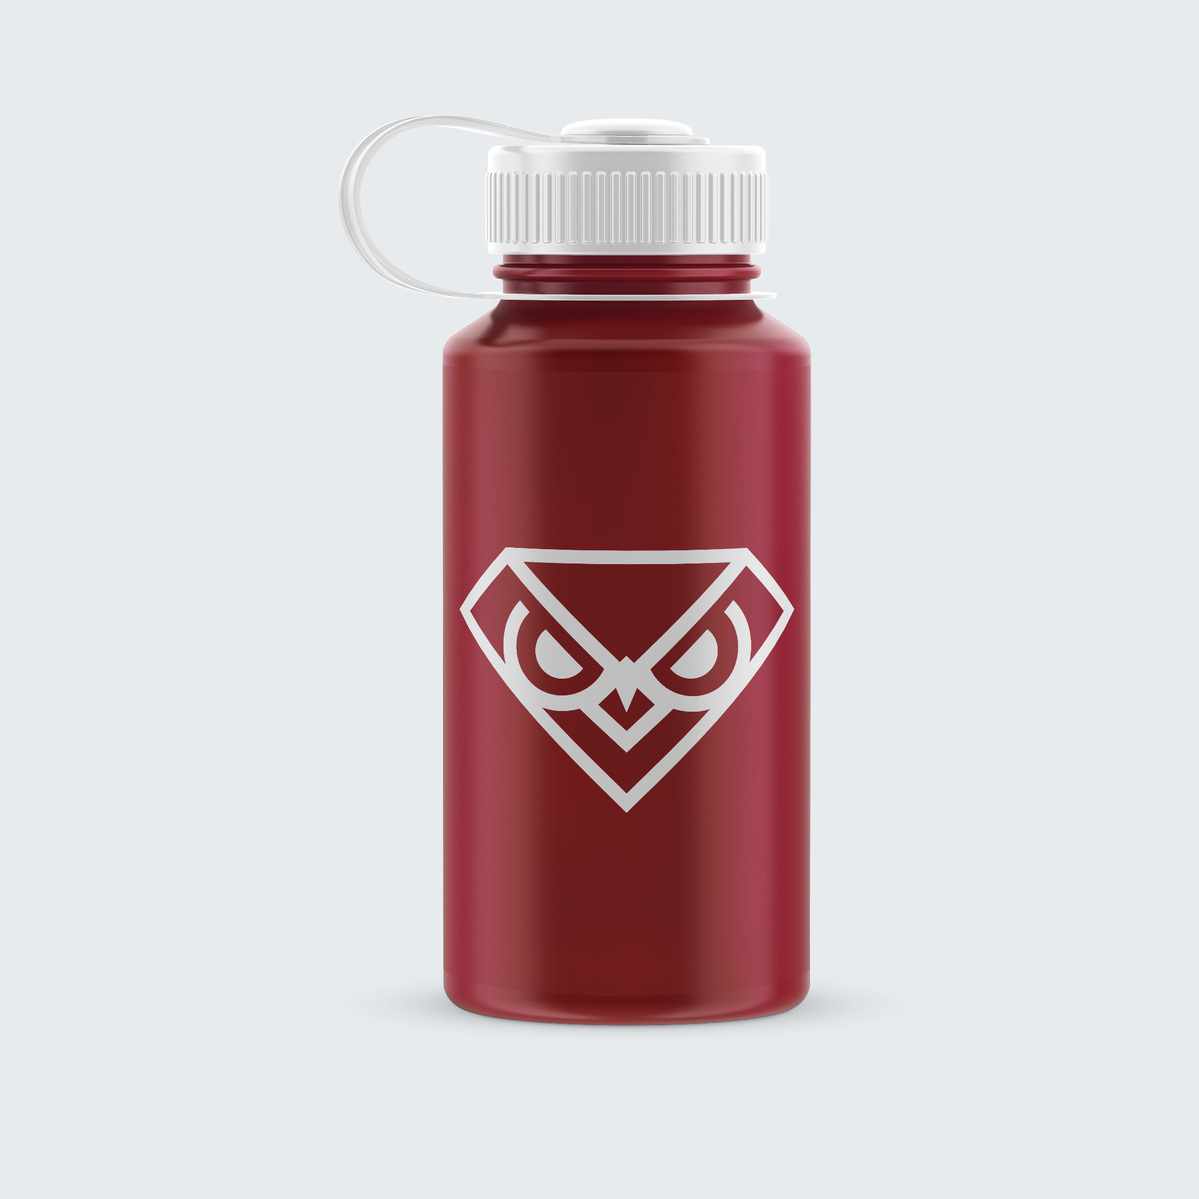 Proposed Temple Owl logo on water bottle